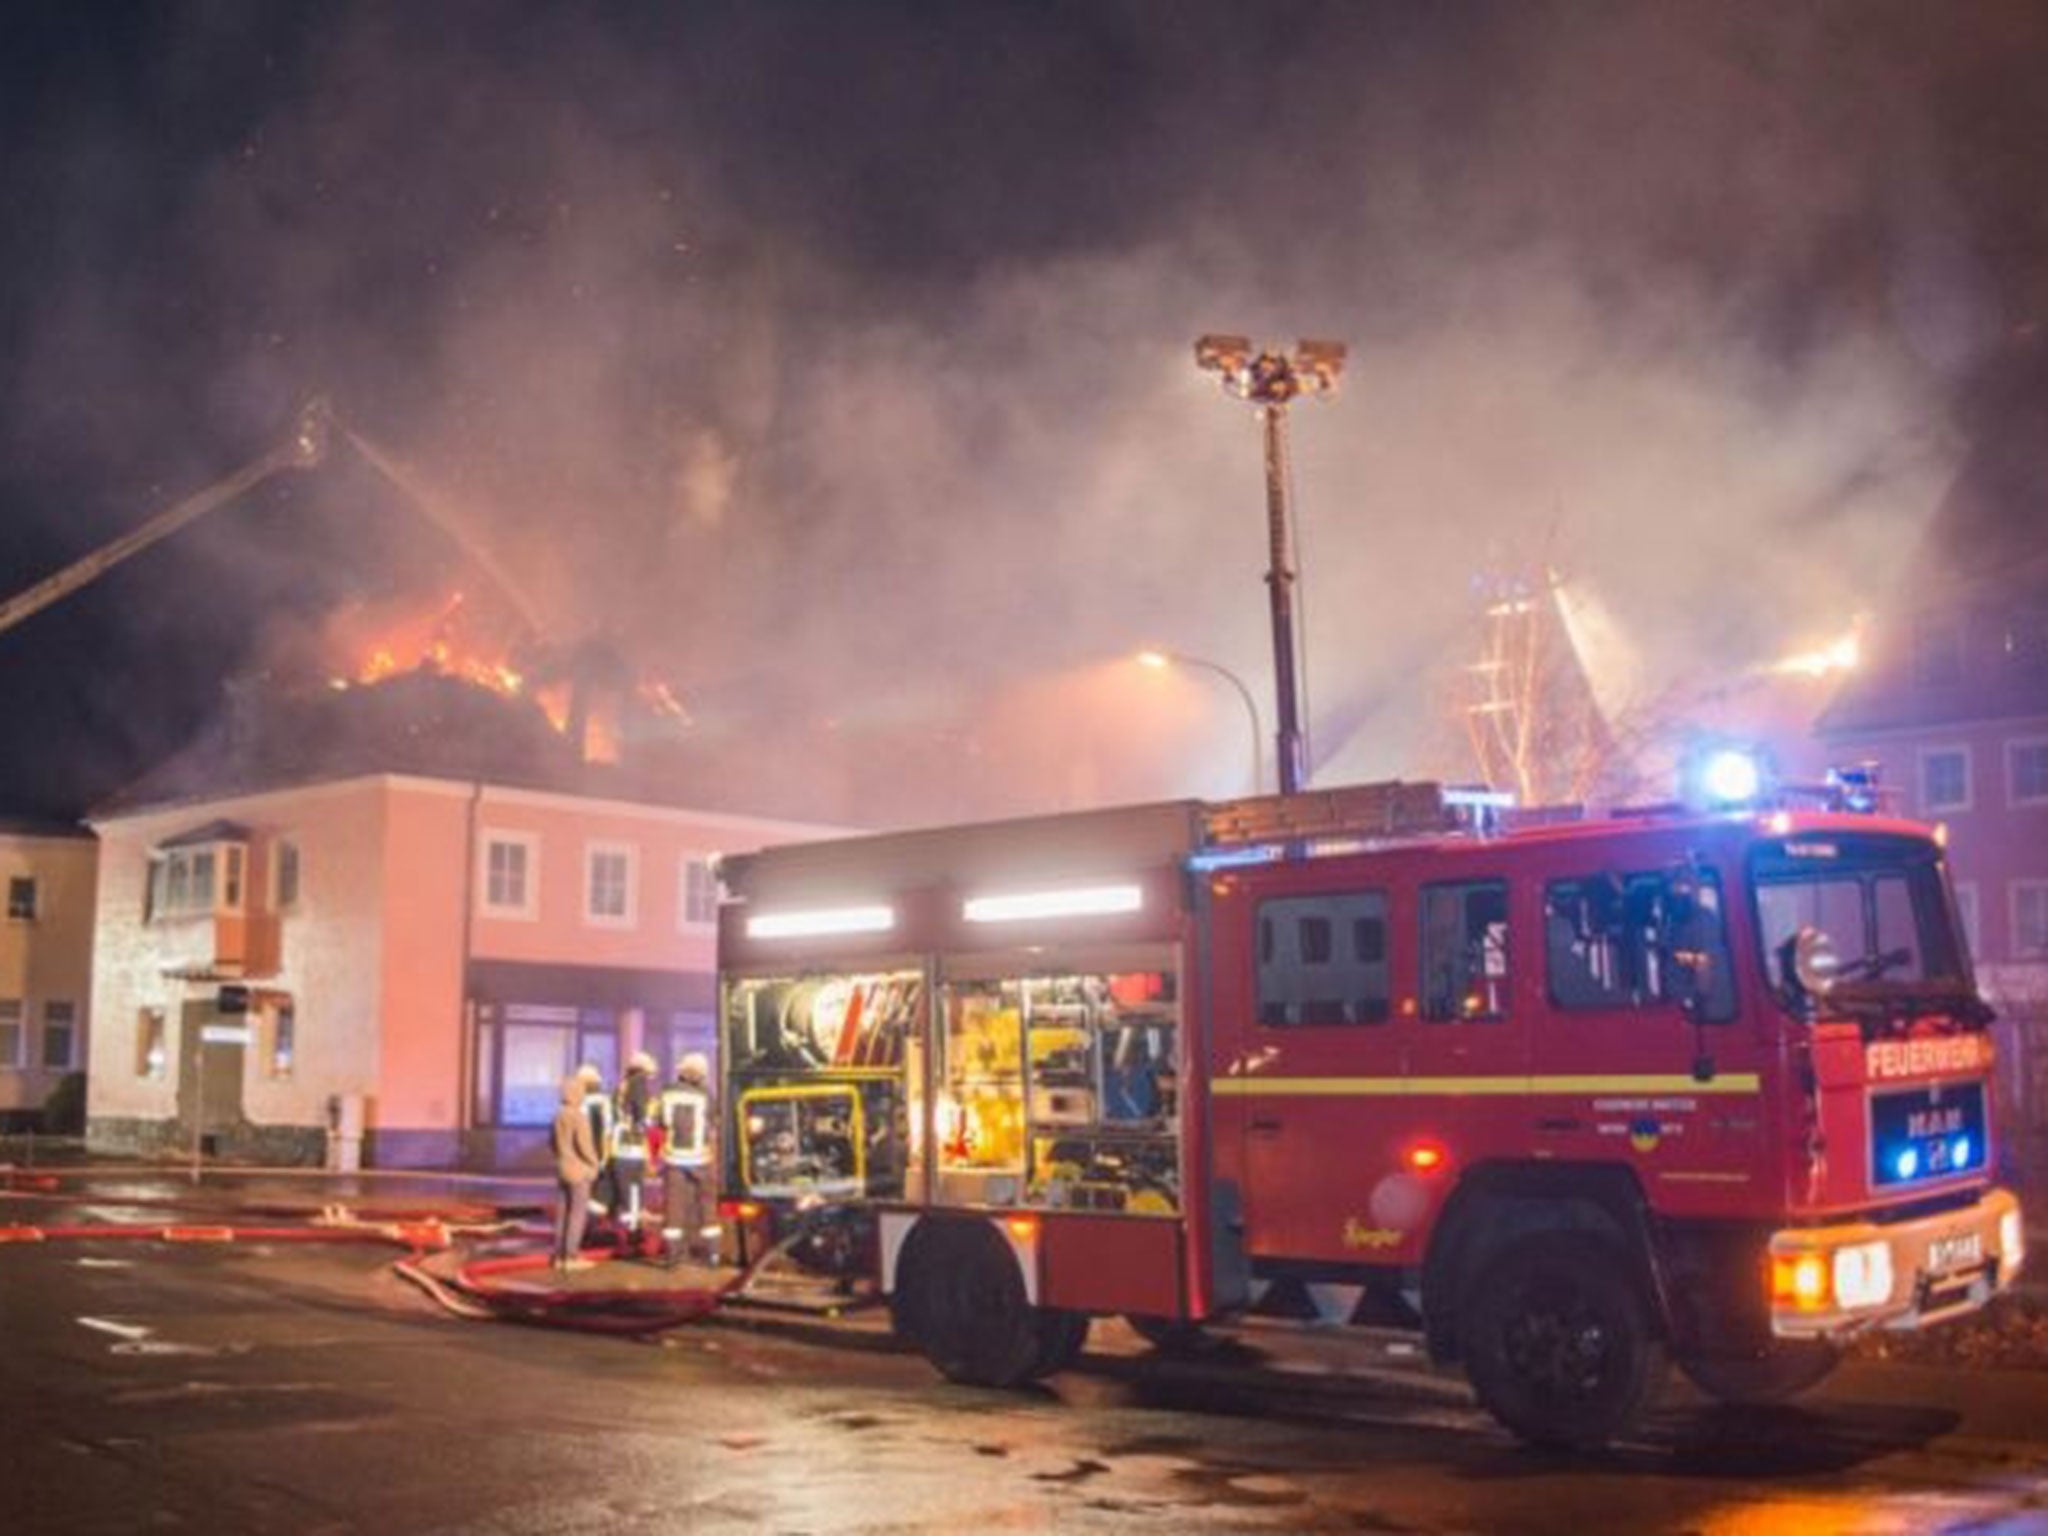 Firefighters tackle a blaze at a refugee shelter in Bautzen, Germany